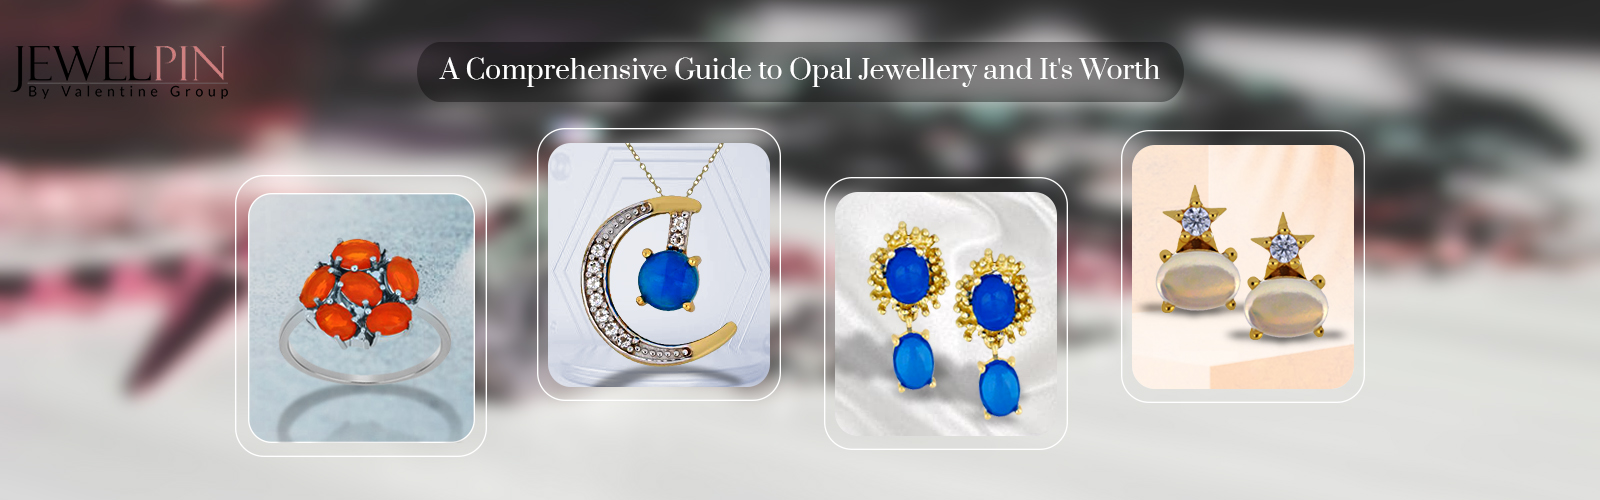 guide to opal jewellery and its worth